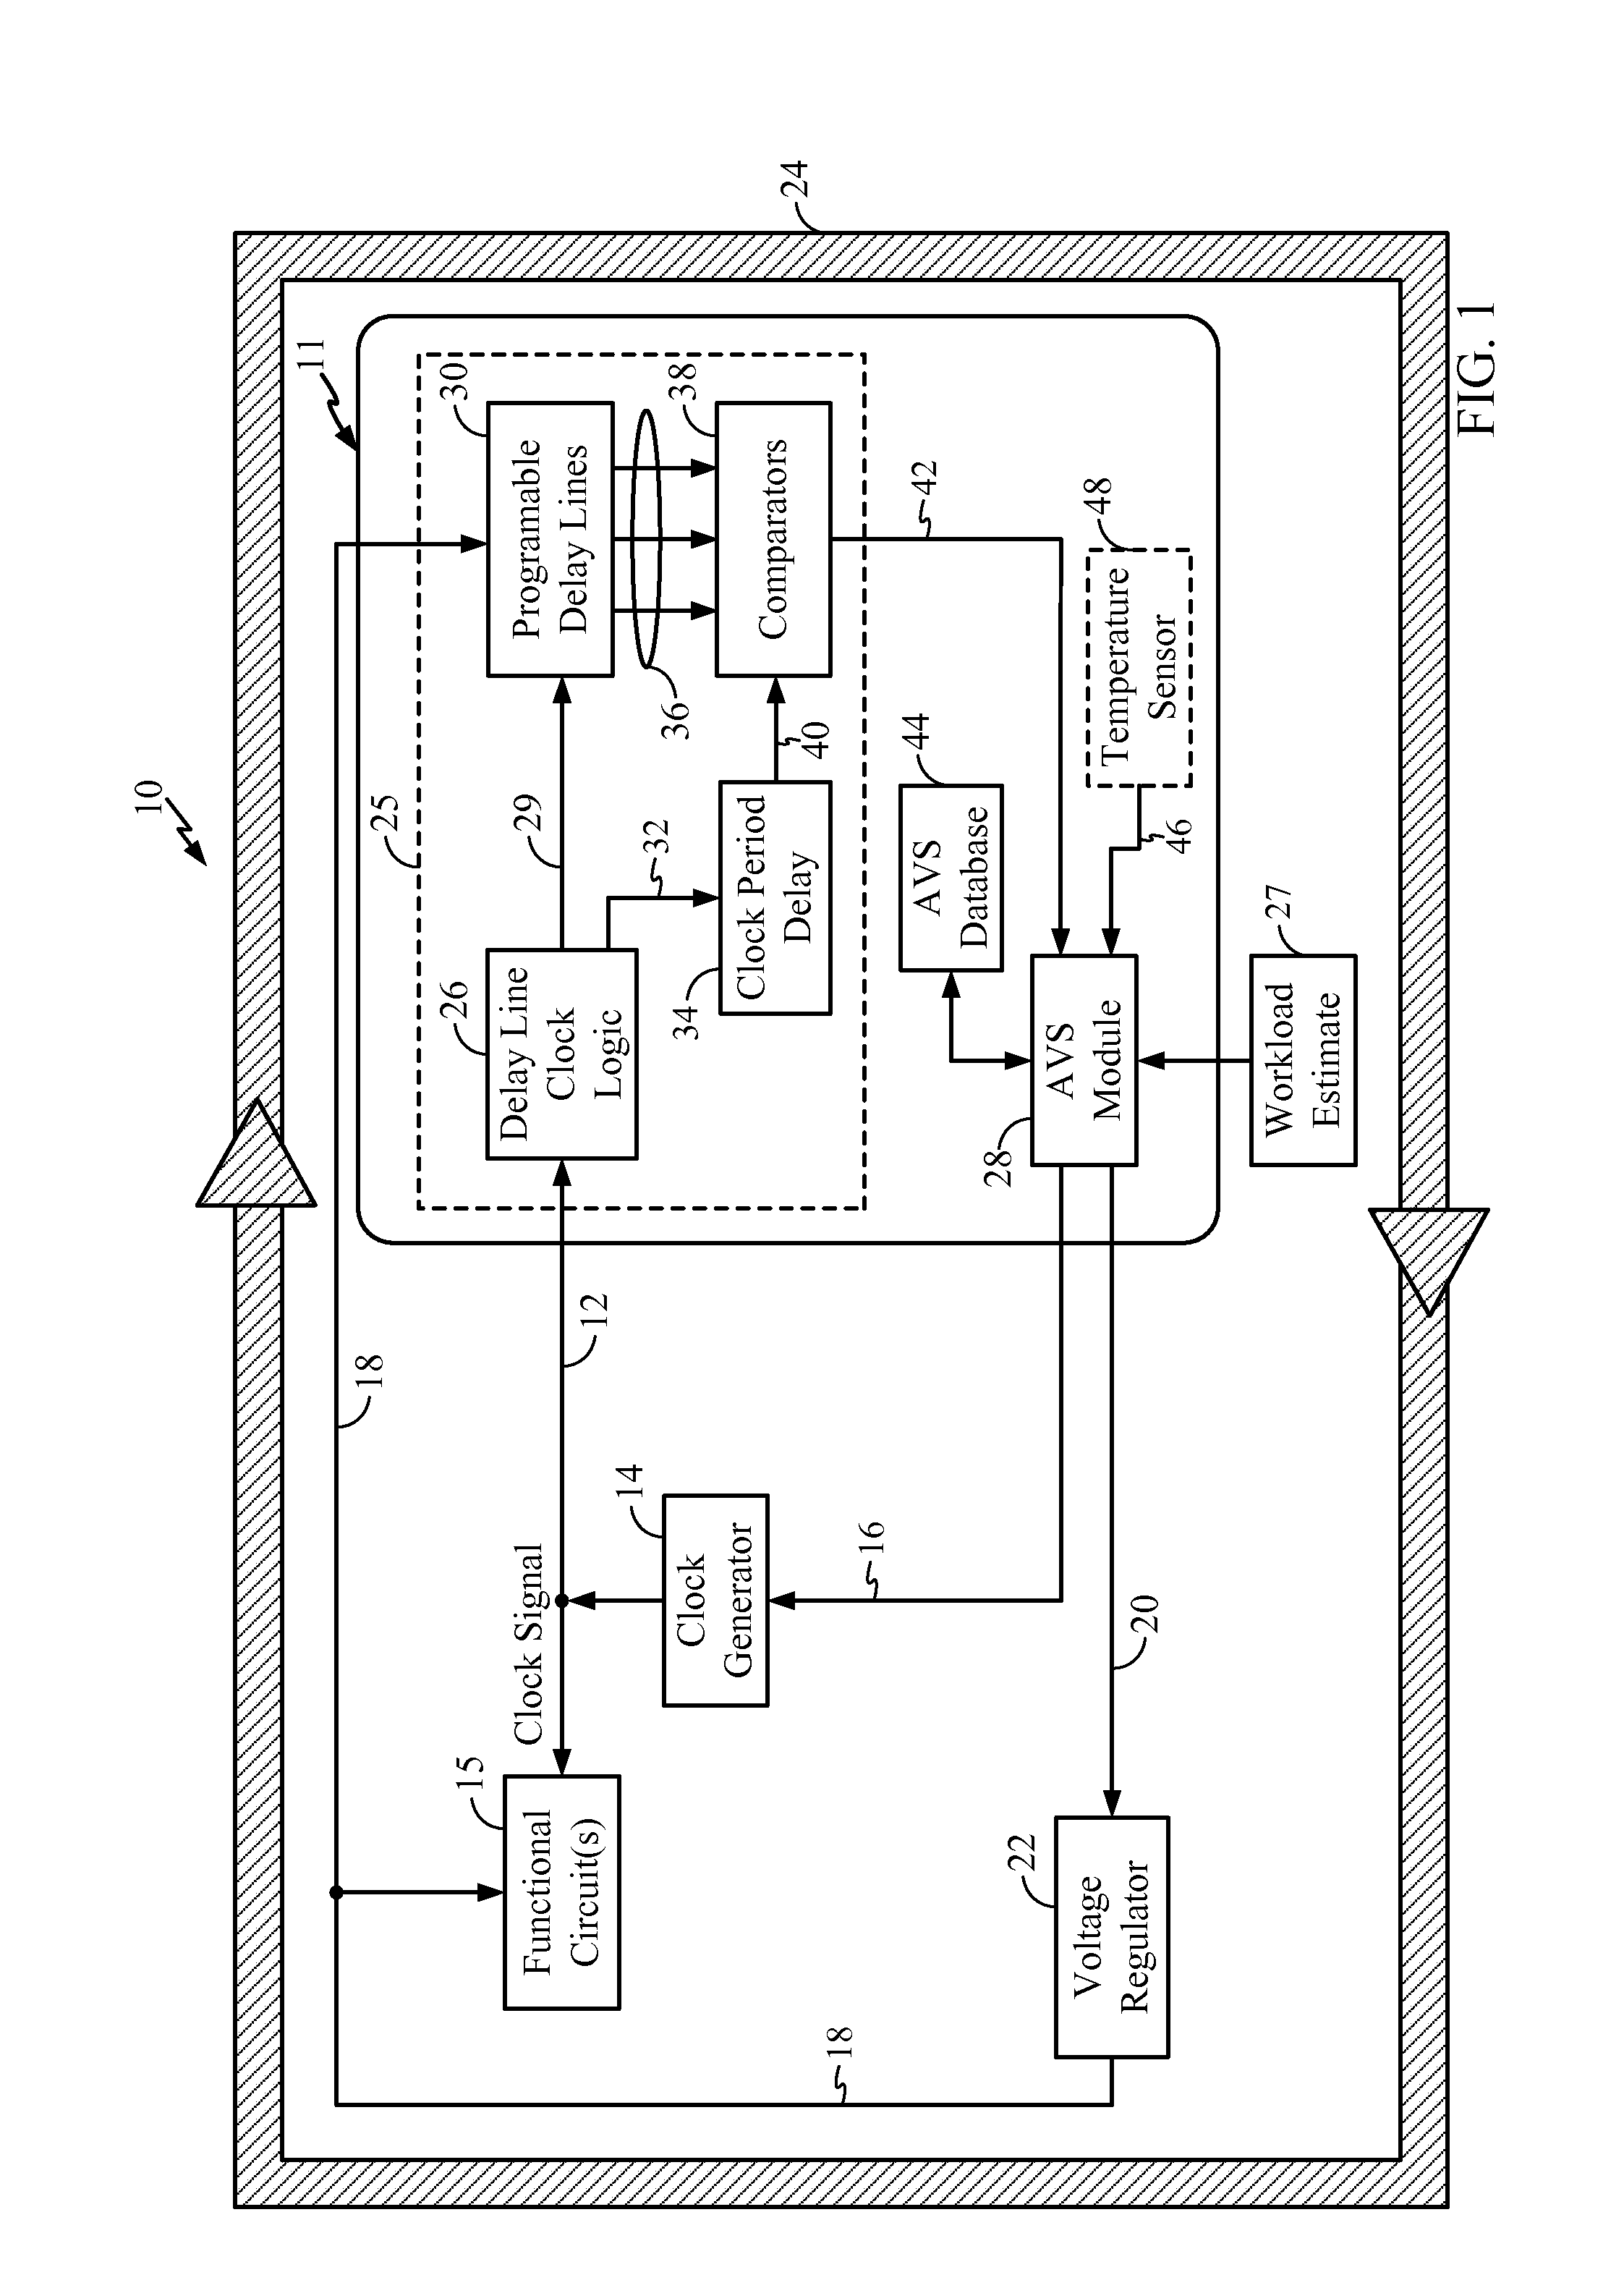 Adaptive voltage scalers (AVS), systems, and related methods